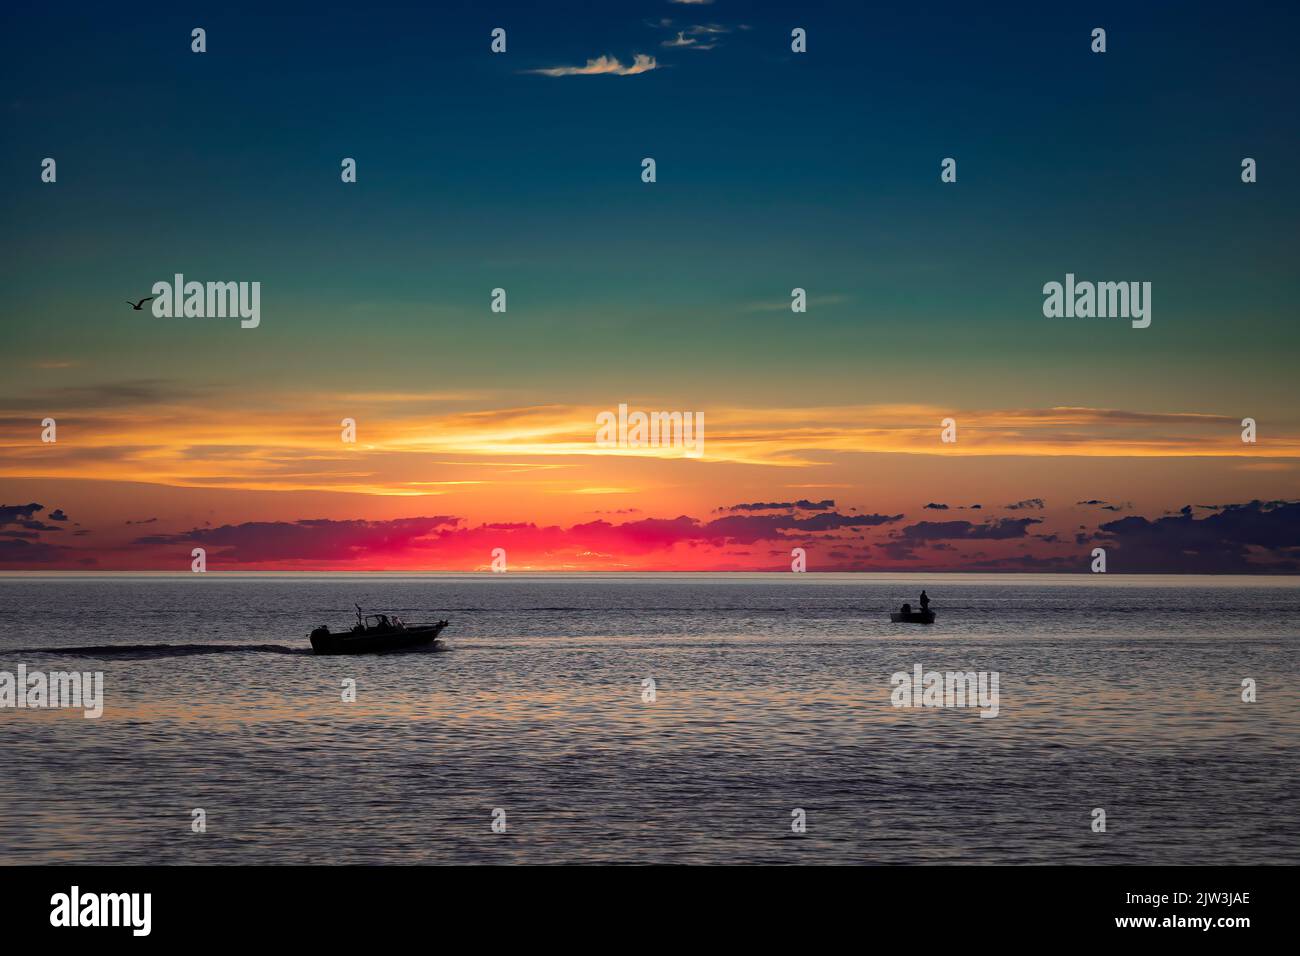 The morning sun is about to rise behind fishermen in their boats on Lake Michigan off the coast of Manitowoc, Wisconsin. Stock Photo